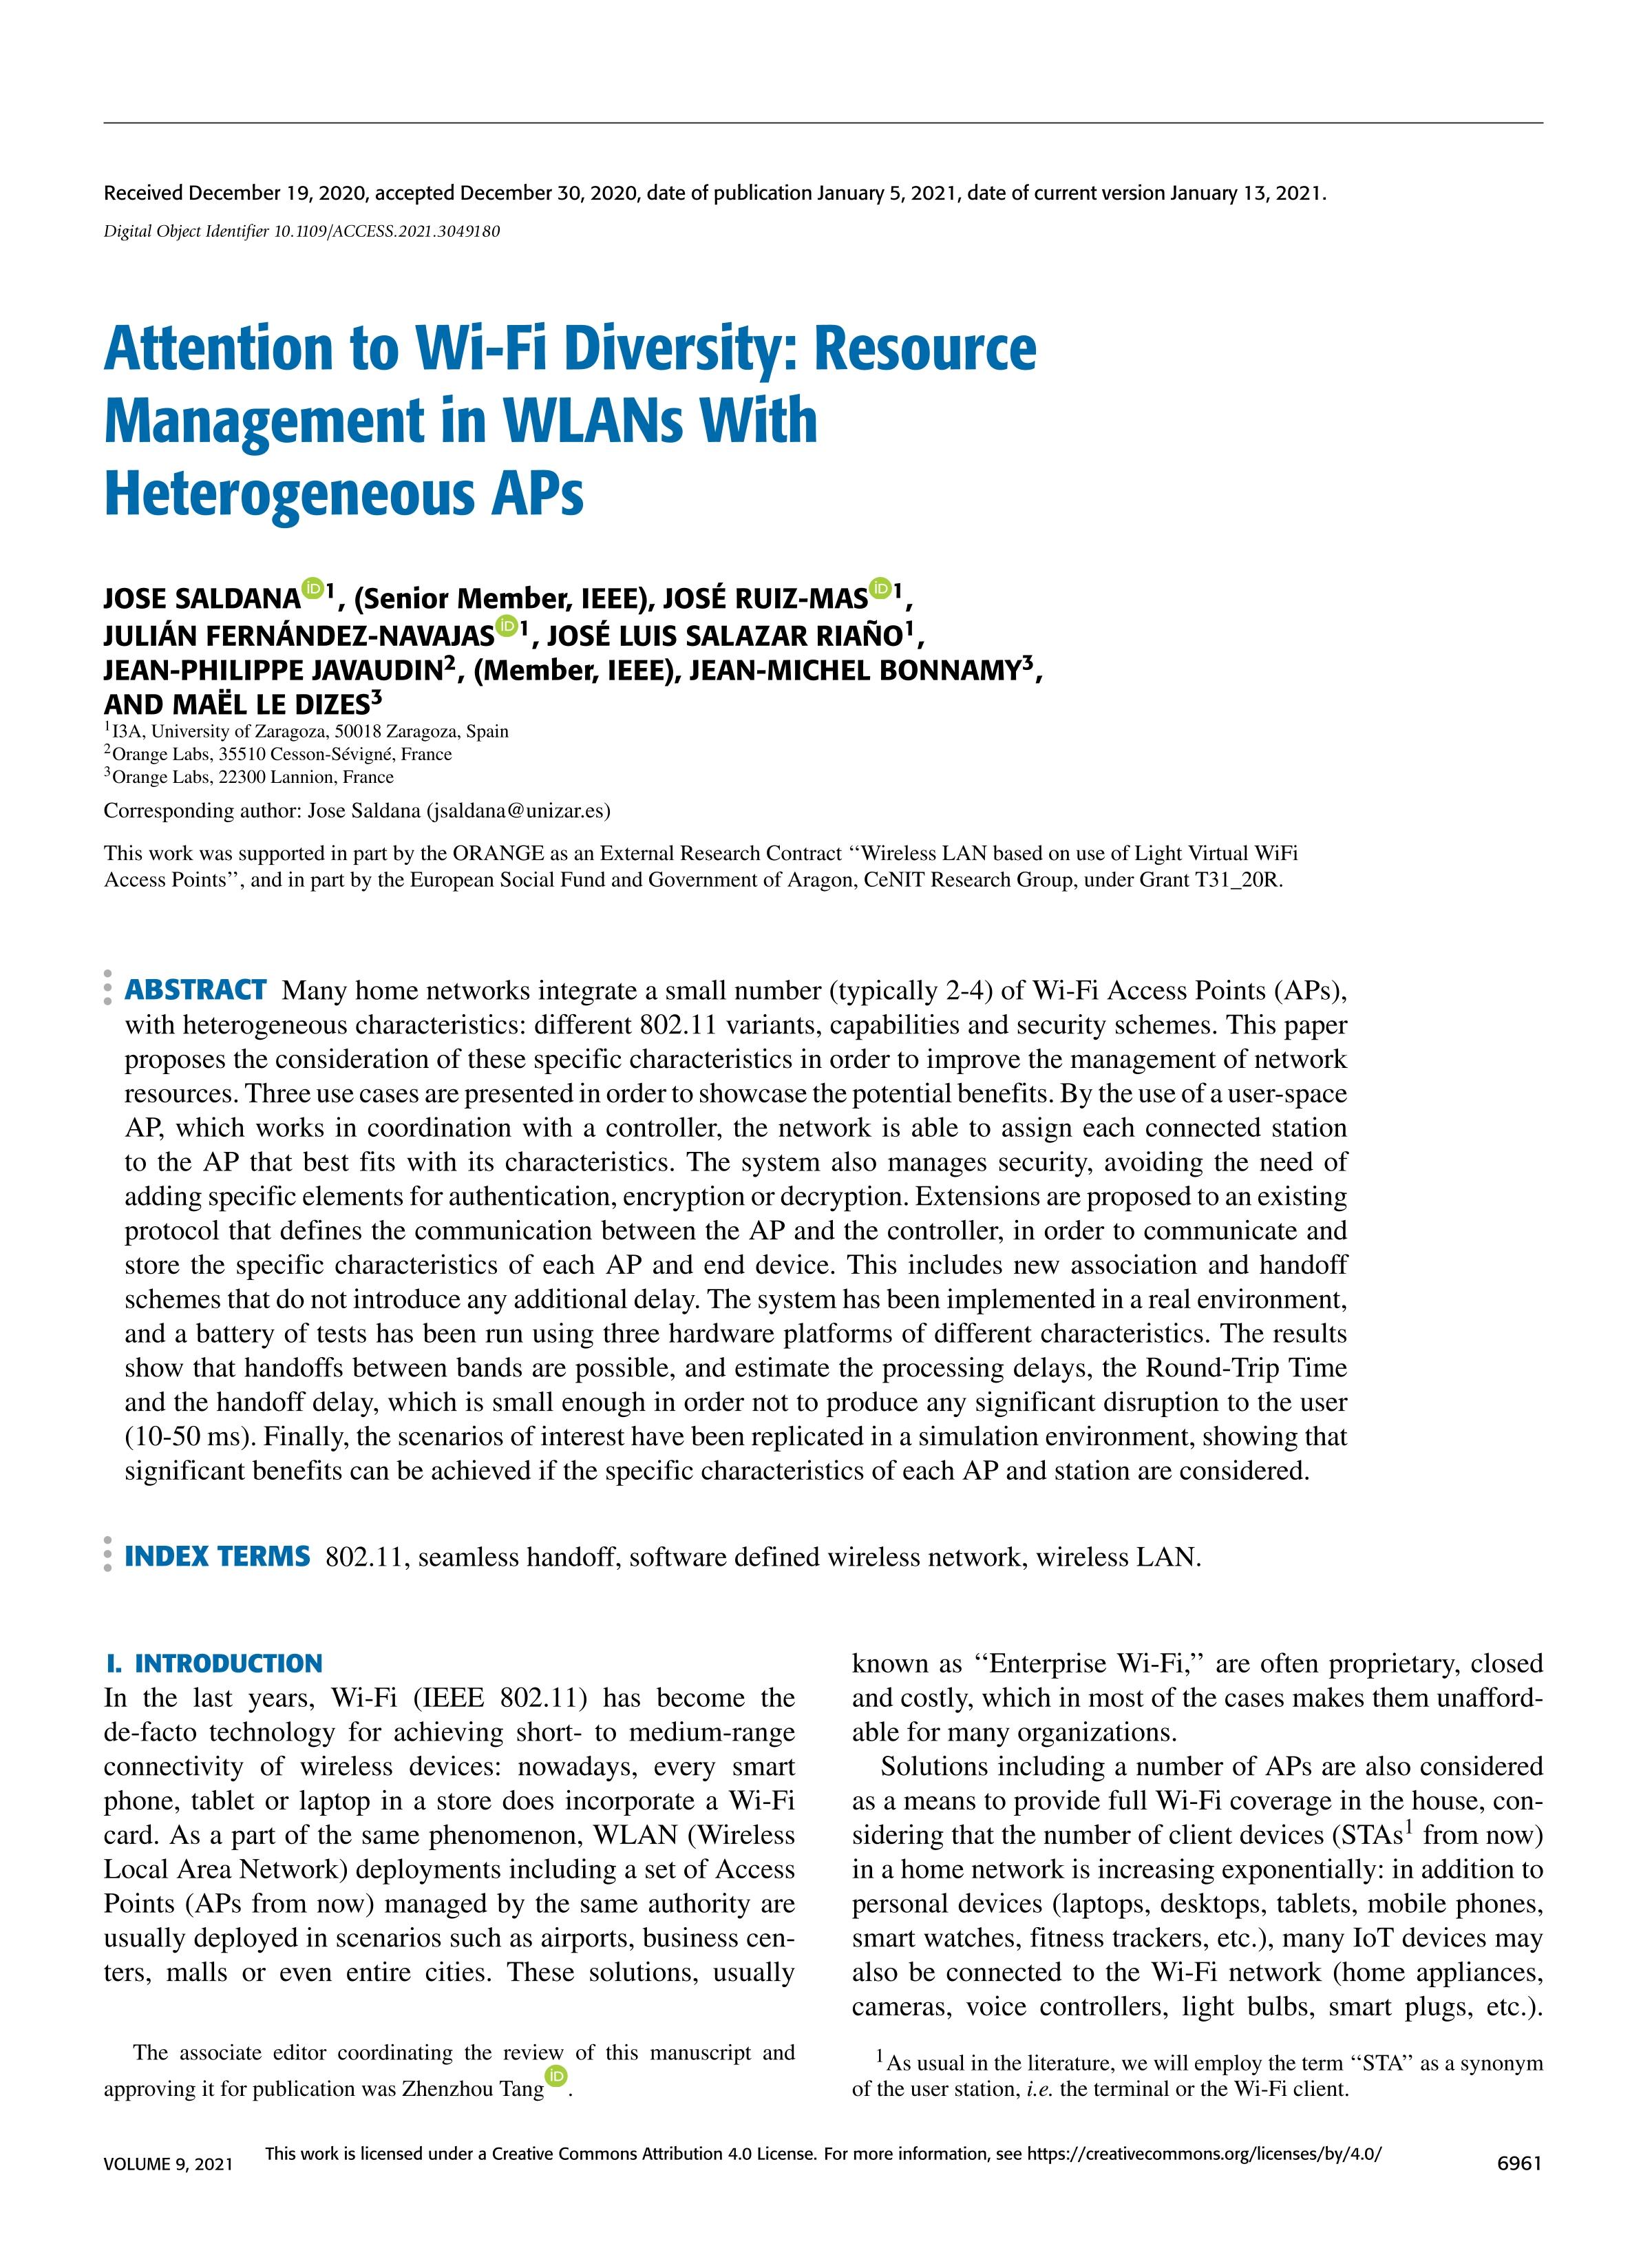 Attention to Wi-Fi Diversity: Resource Management in WLANs with Heterogeneous APs